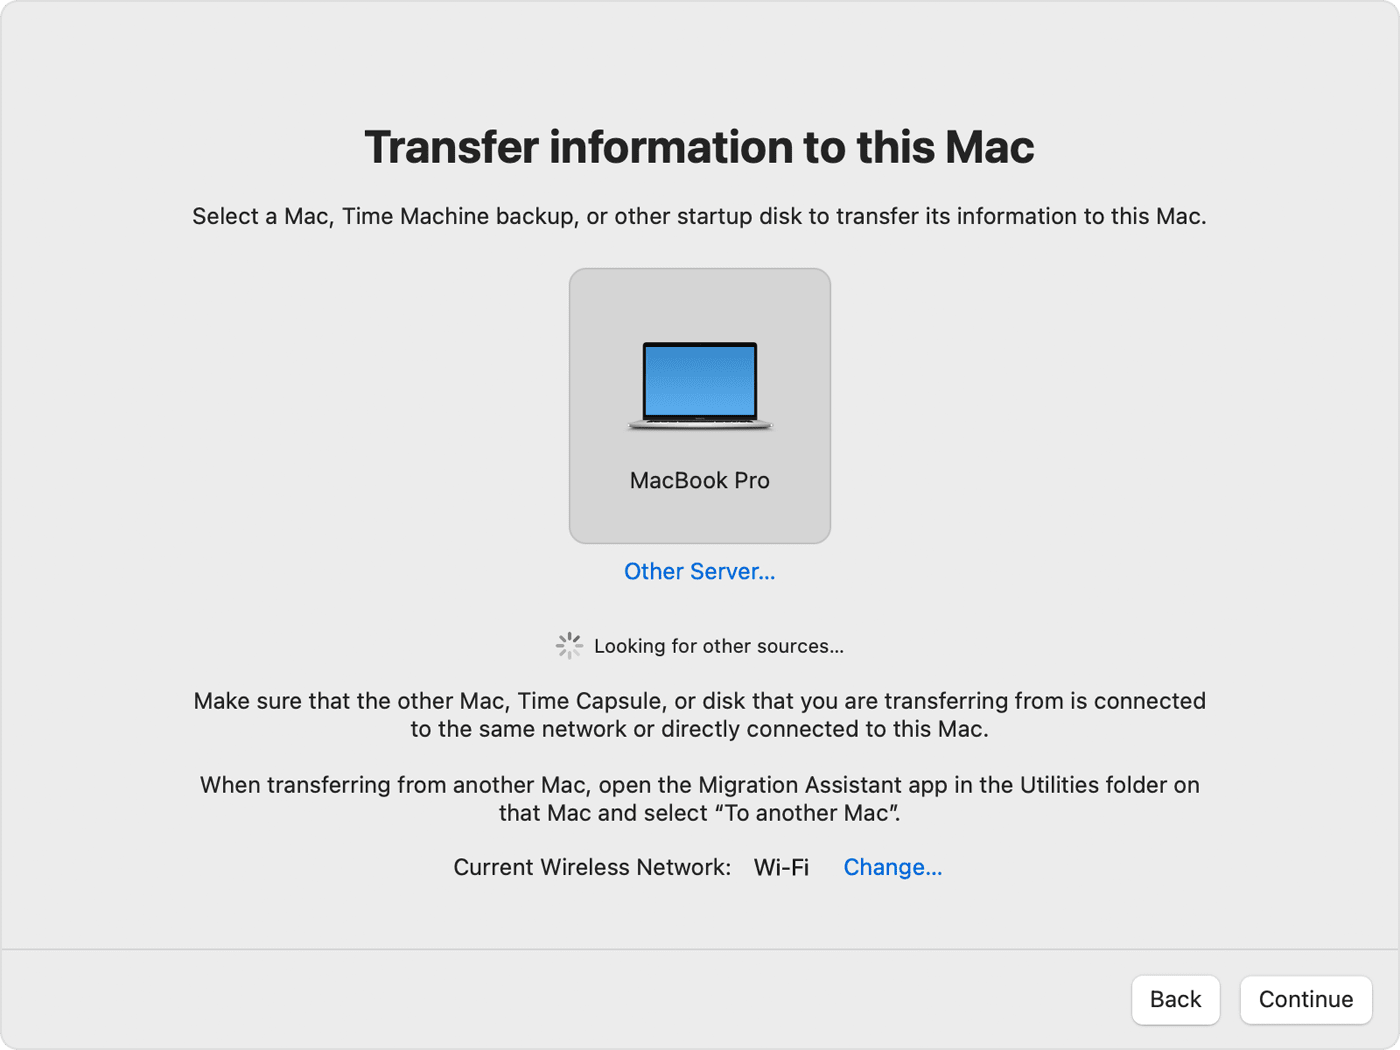 Transfer information to this mac using Cloud Integration.